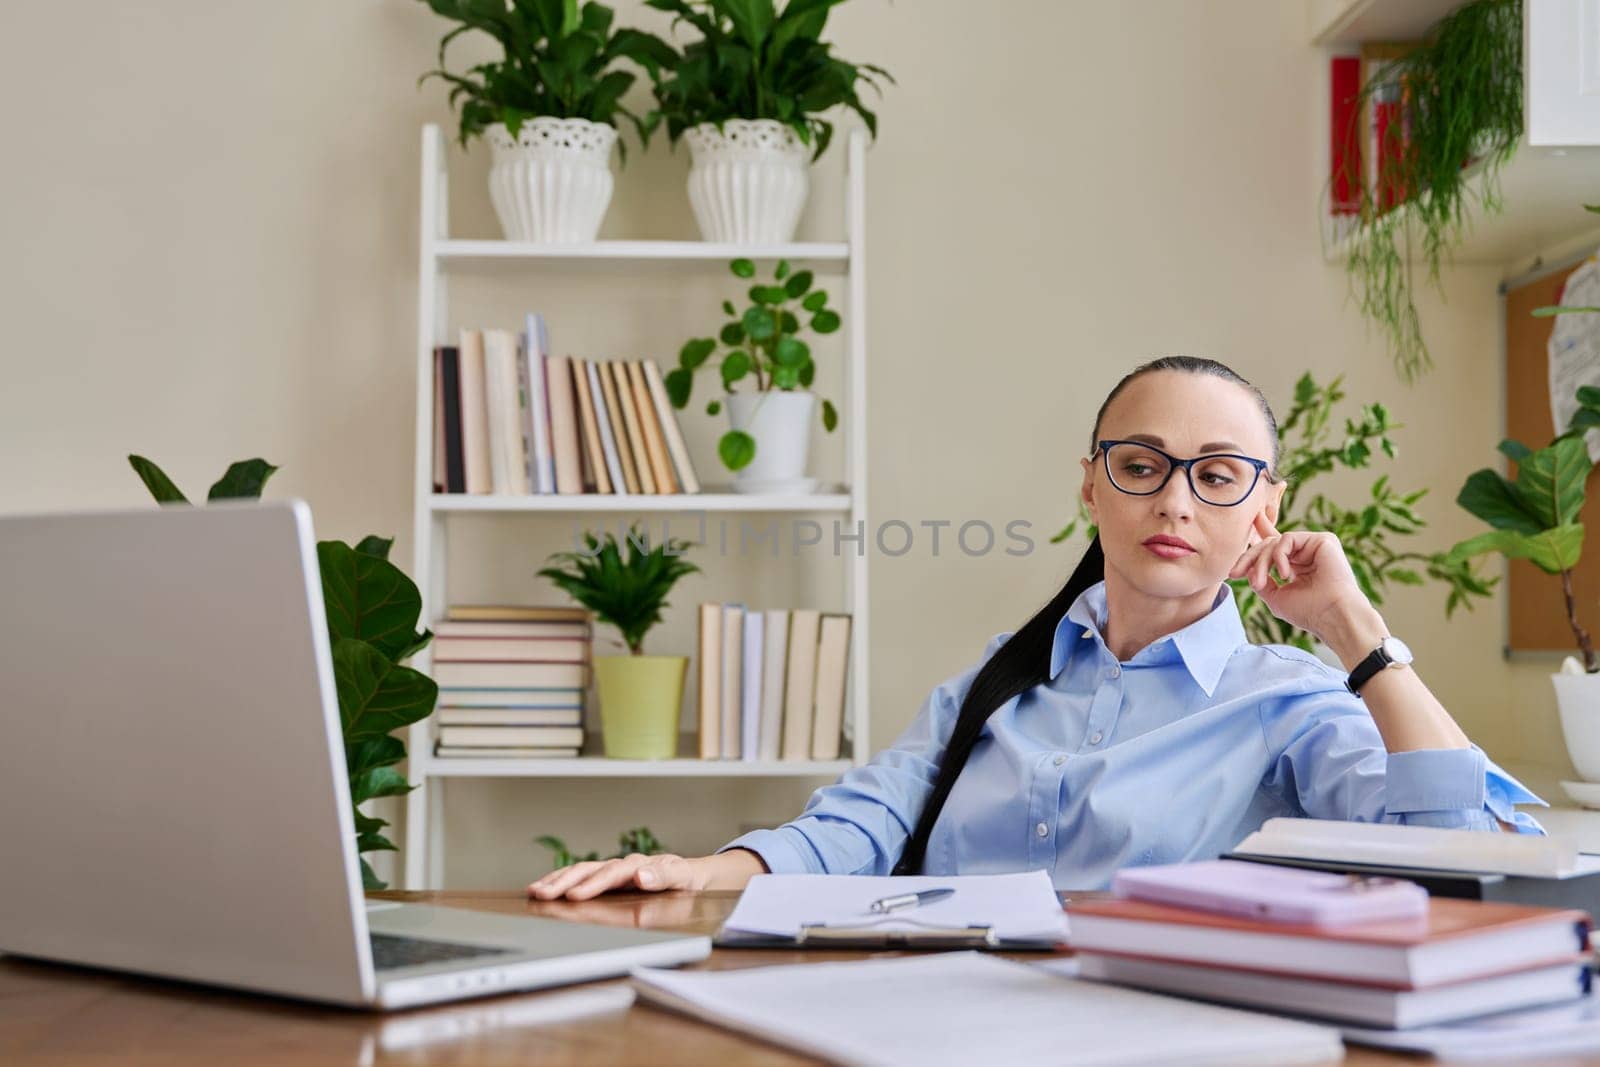 Woman psychologist mental therapist counselor social worker working remotely using computer laptop for online therapy session meeting. Technology psychology psychotherapy counseling support treatment